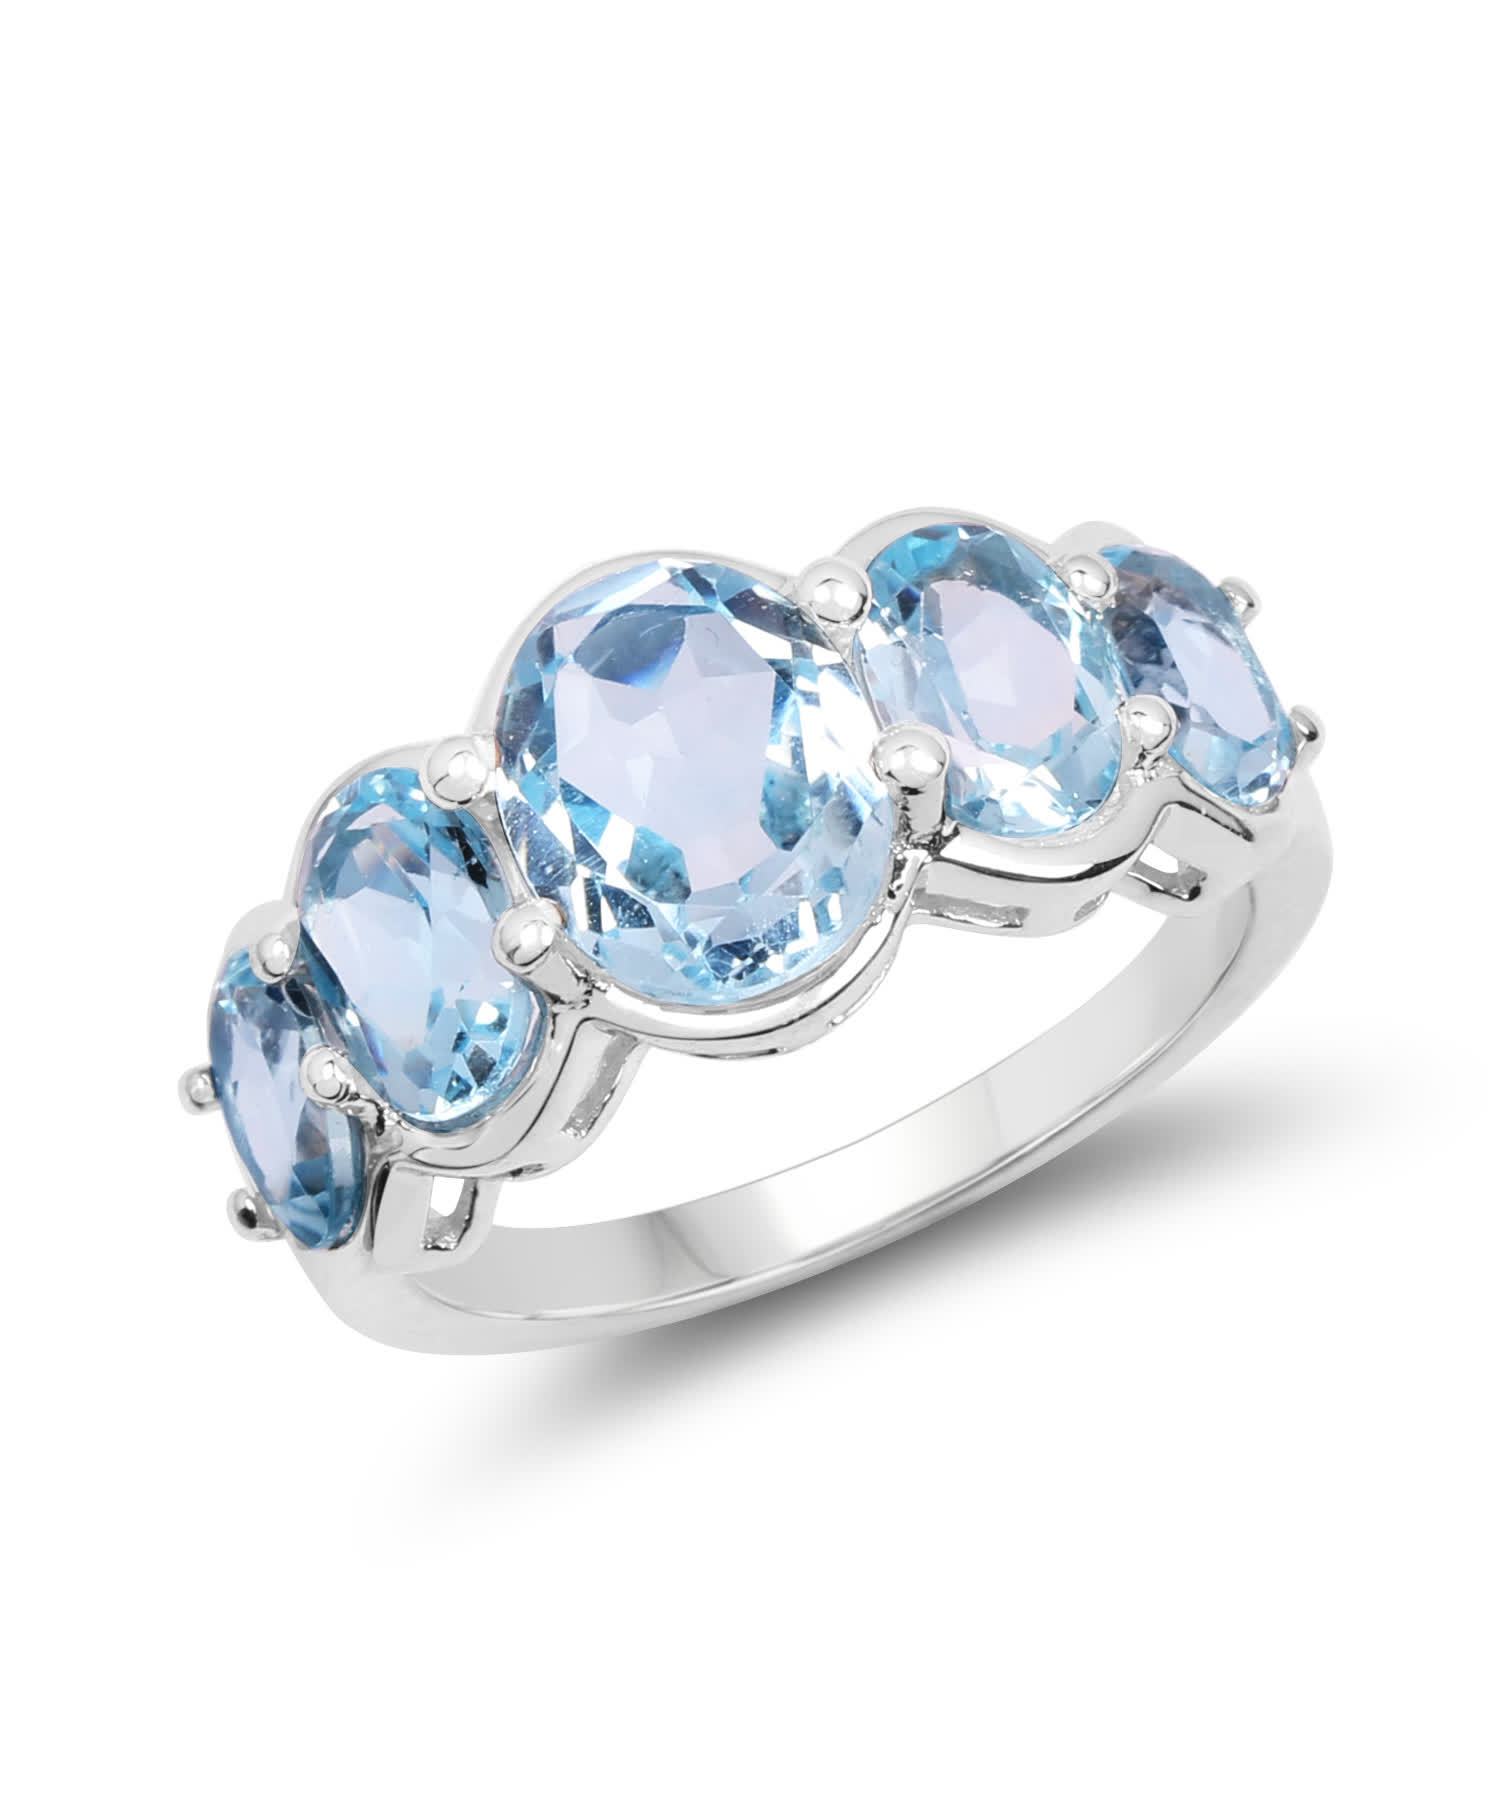 5.42ctw Natural Sky Blue Topaz Rhodium Plated 925 Sterling Silver Right Hand Ring View 1